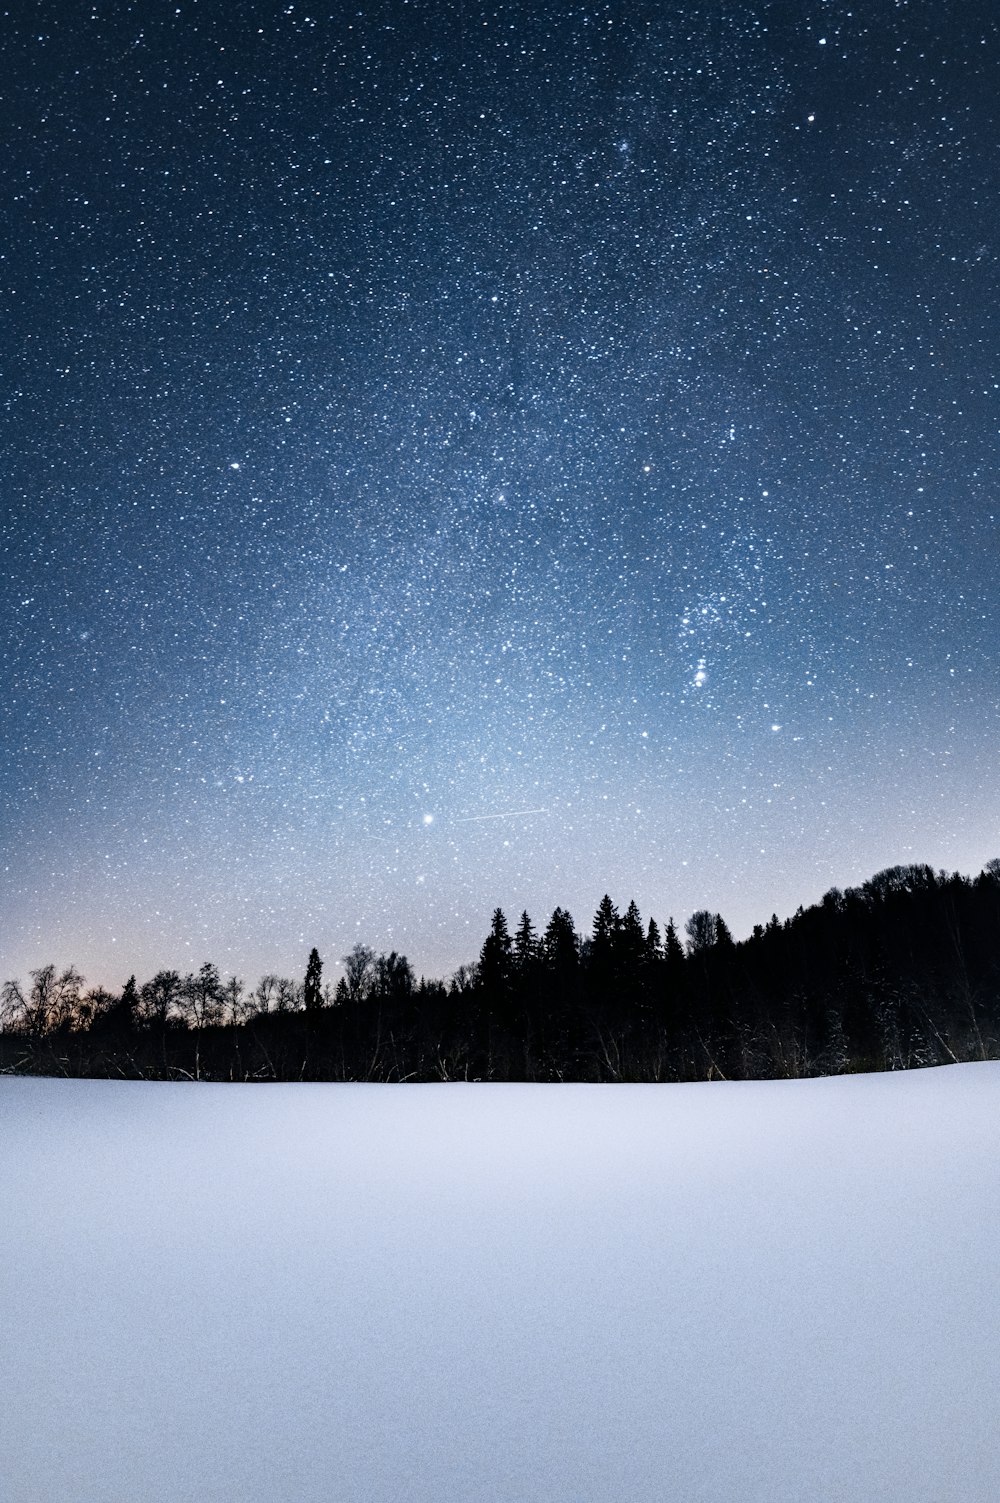 the night sky with stars above a snowy field